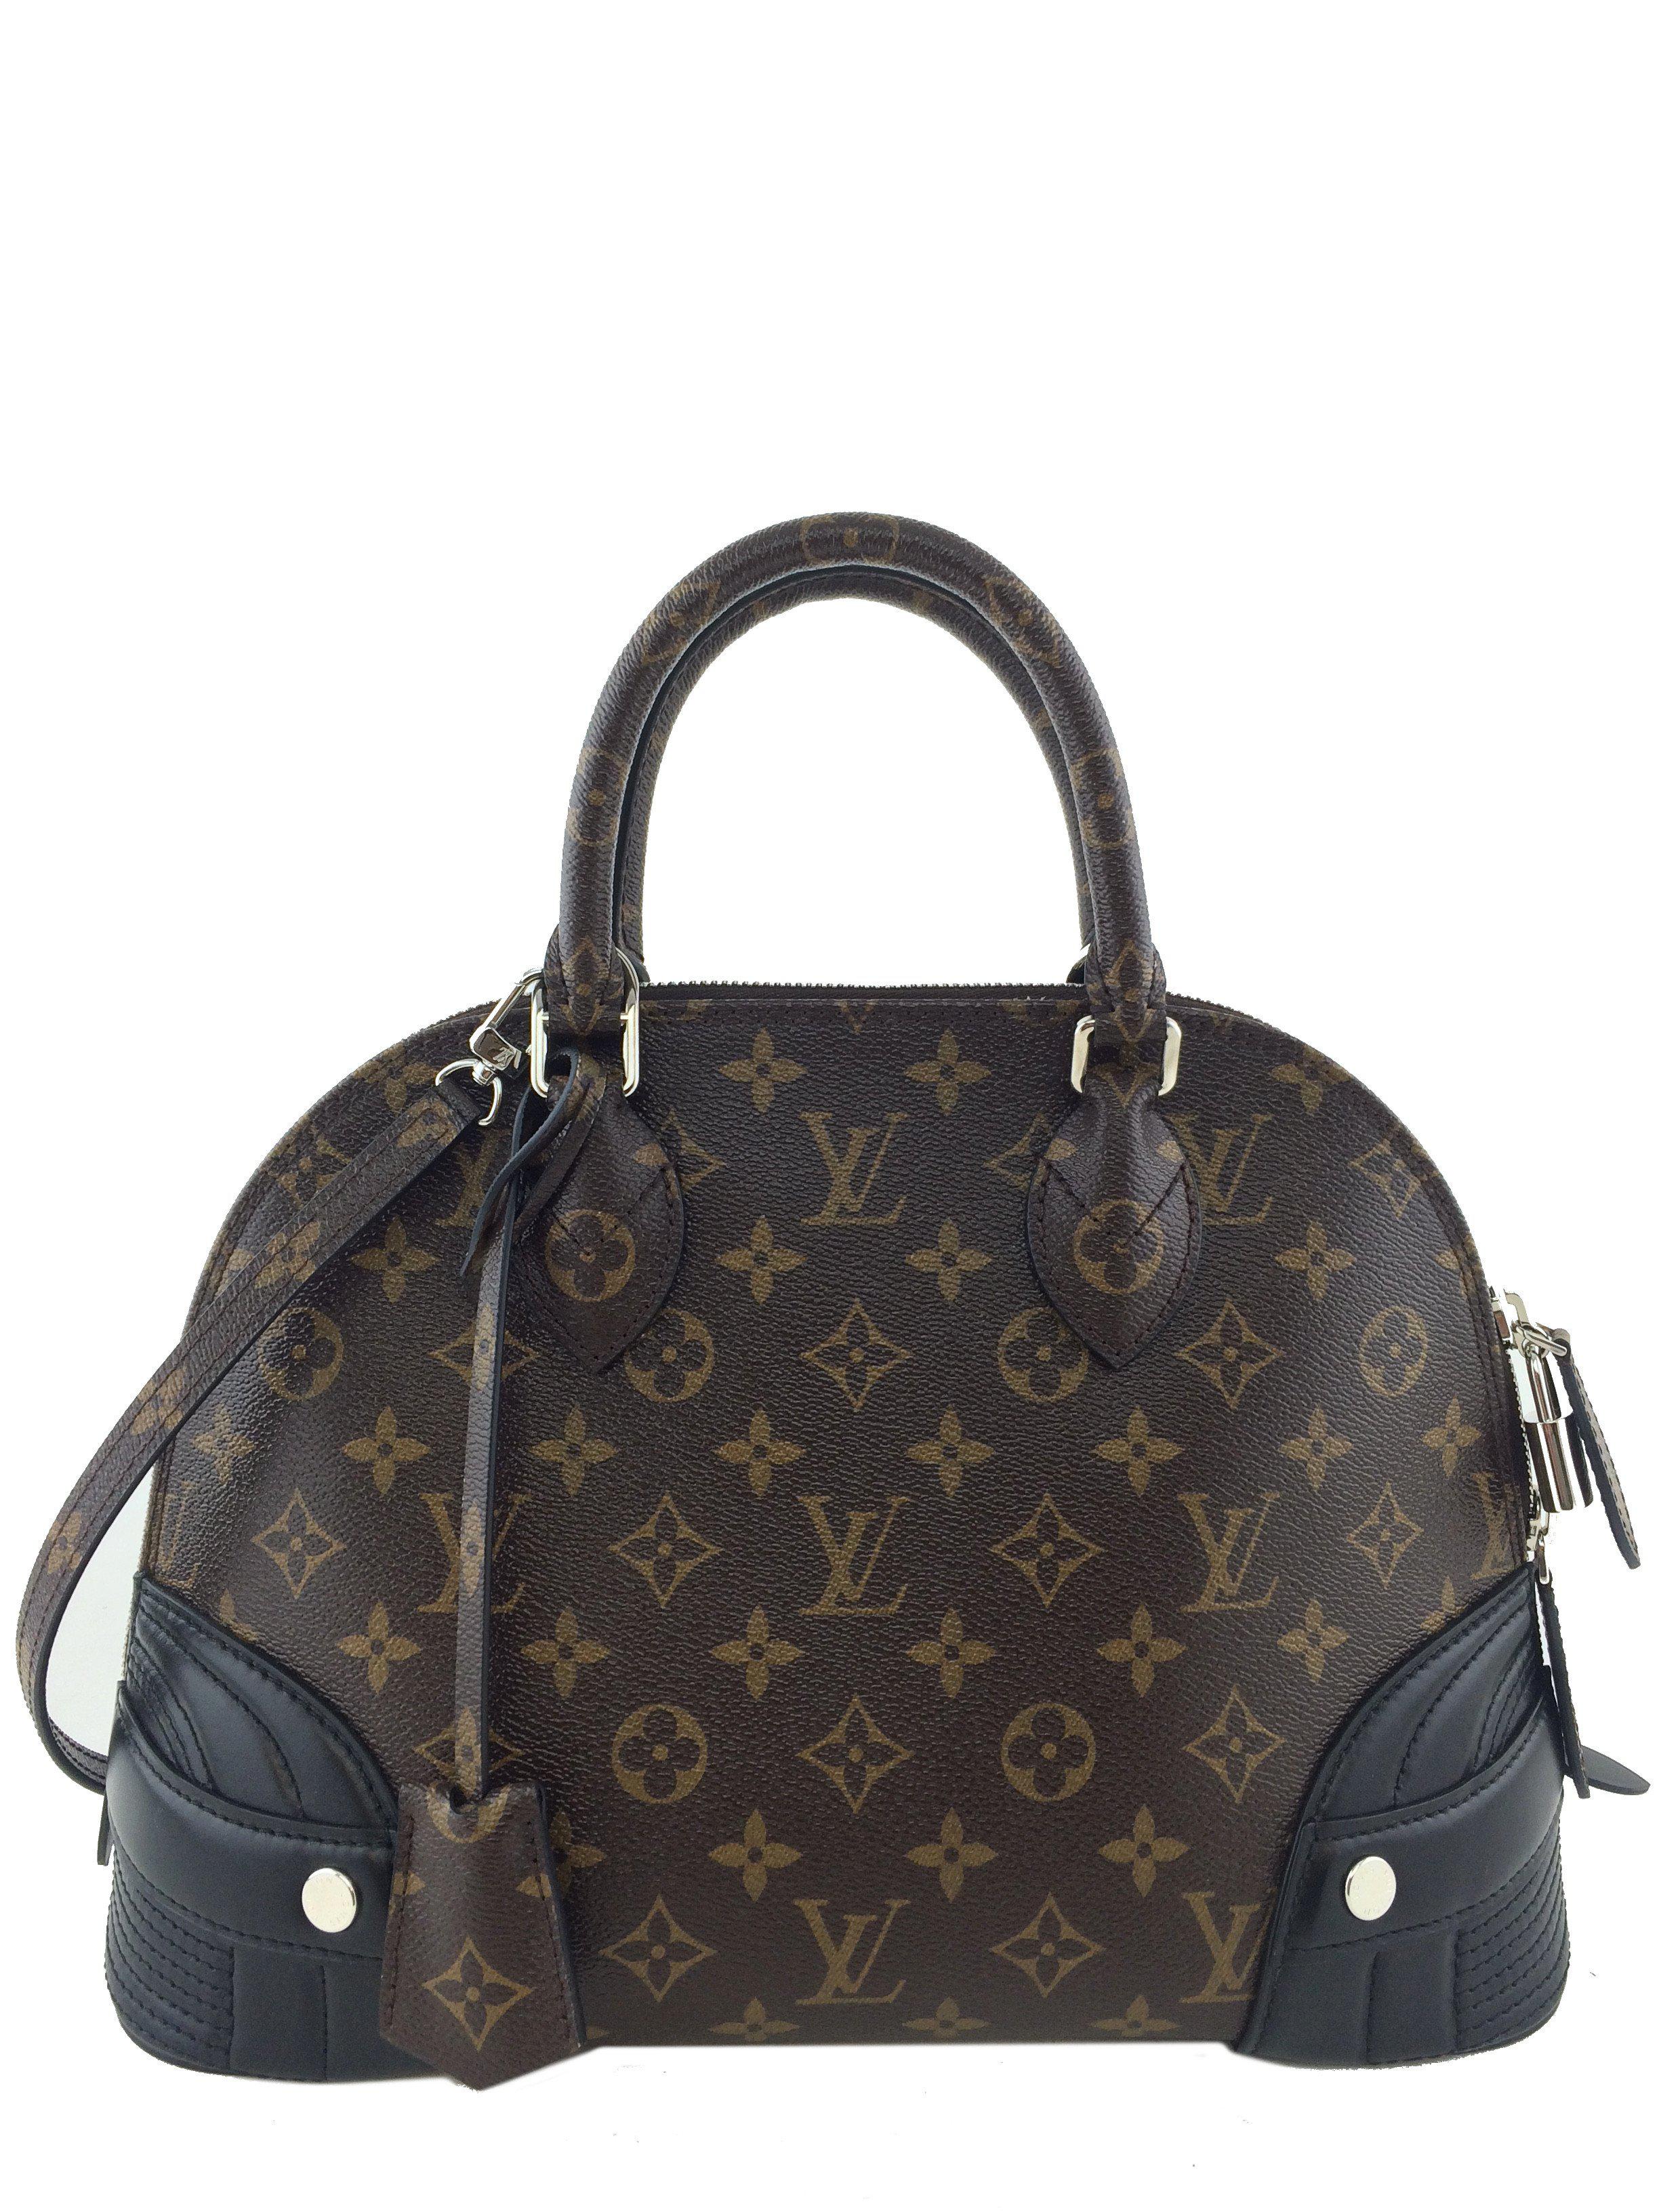 Louis Vuitton Alma PM in Monogram Canvas Review: Unboxing, Details, What  Fits & History of the Bag 